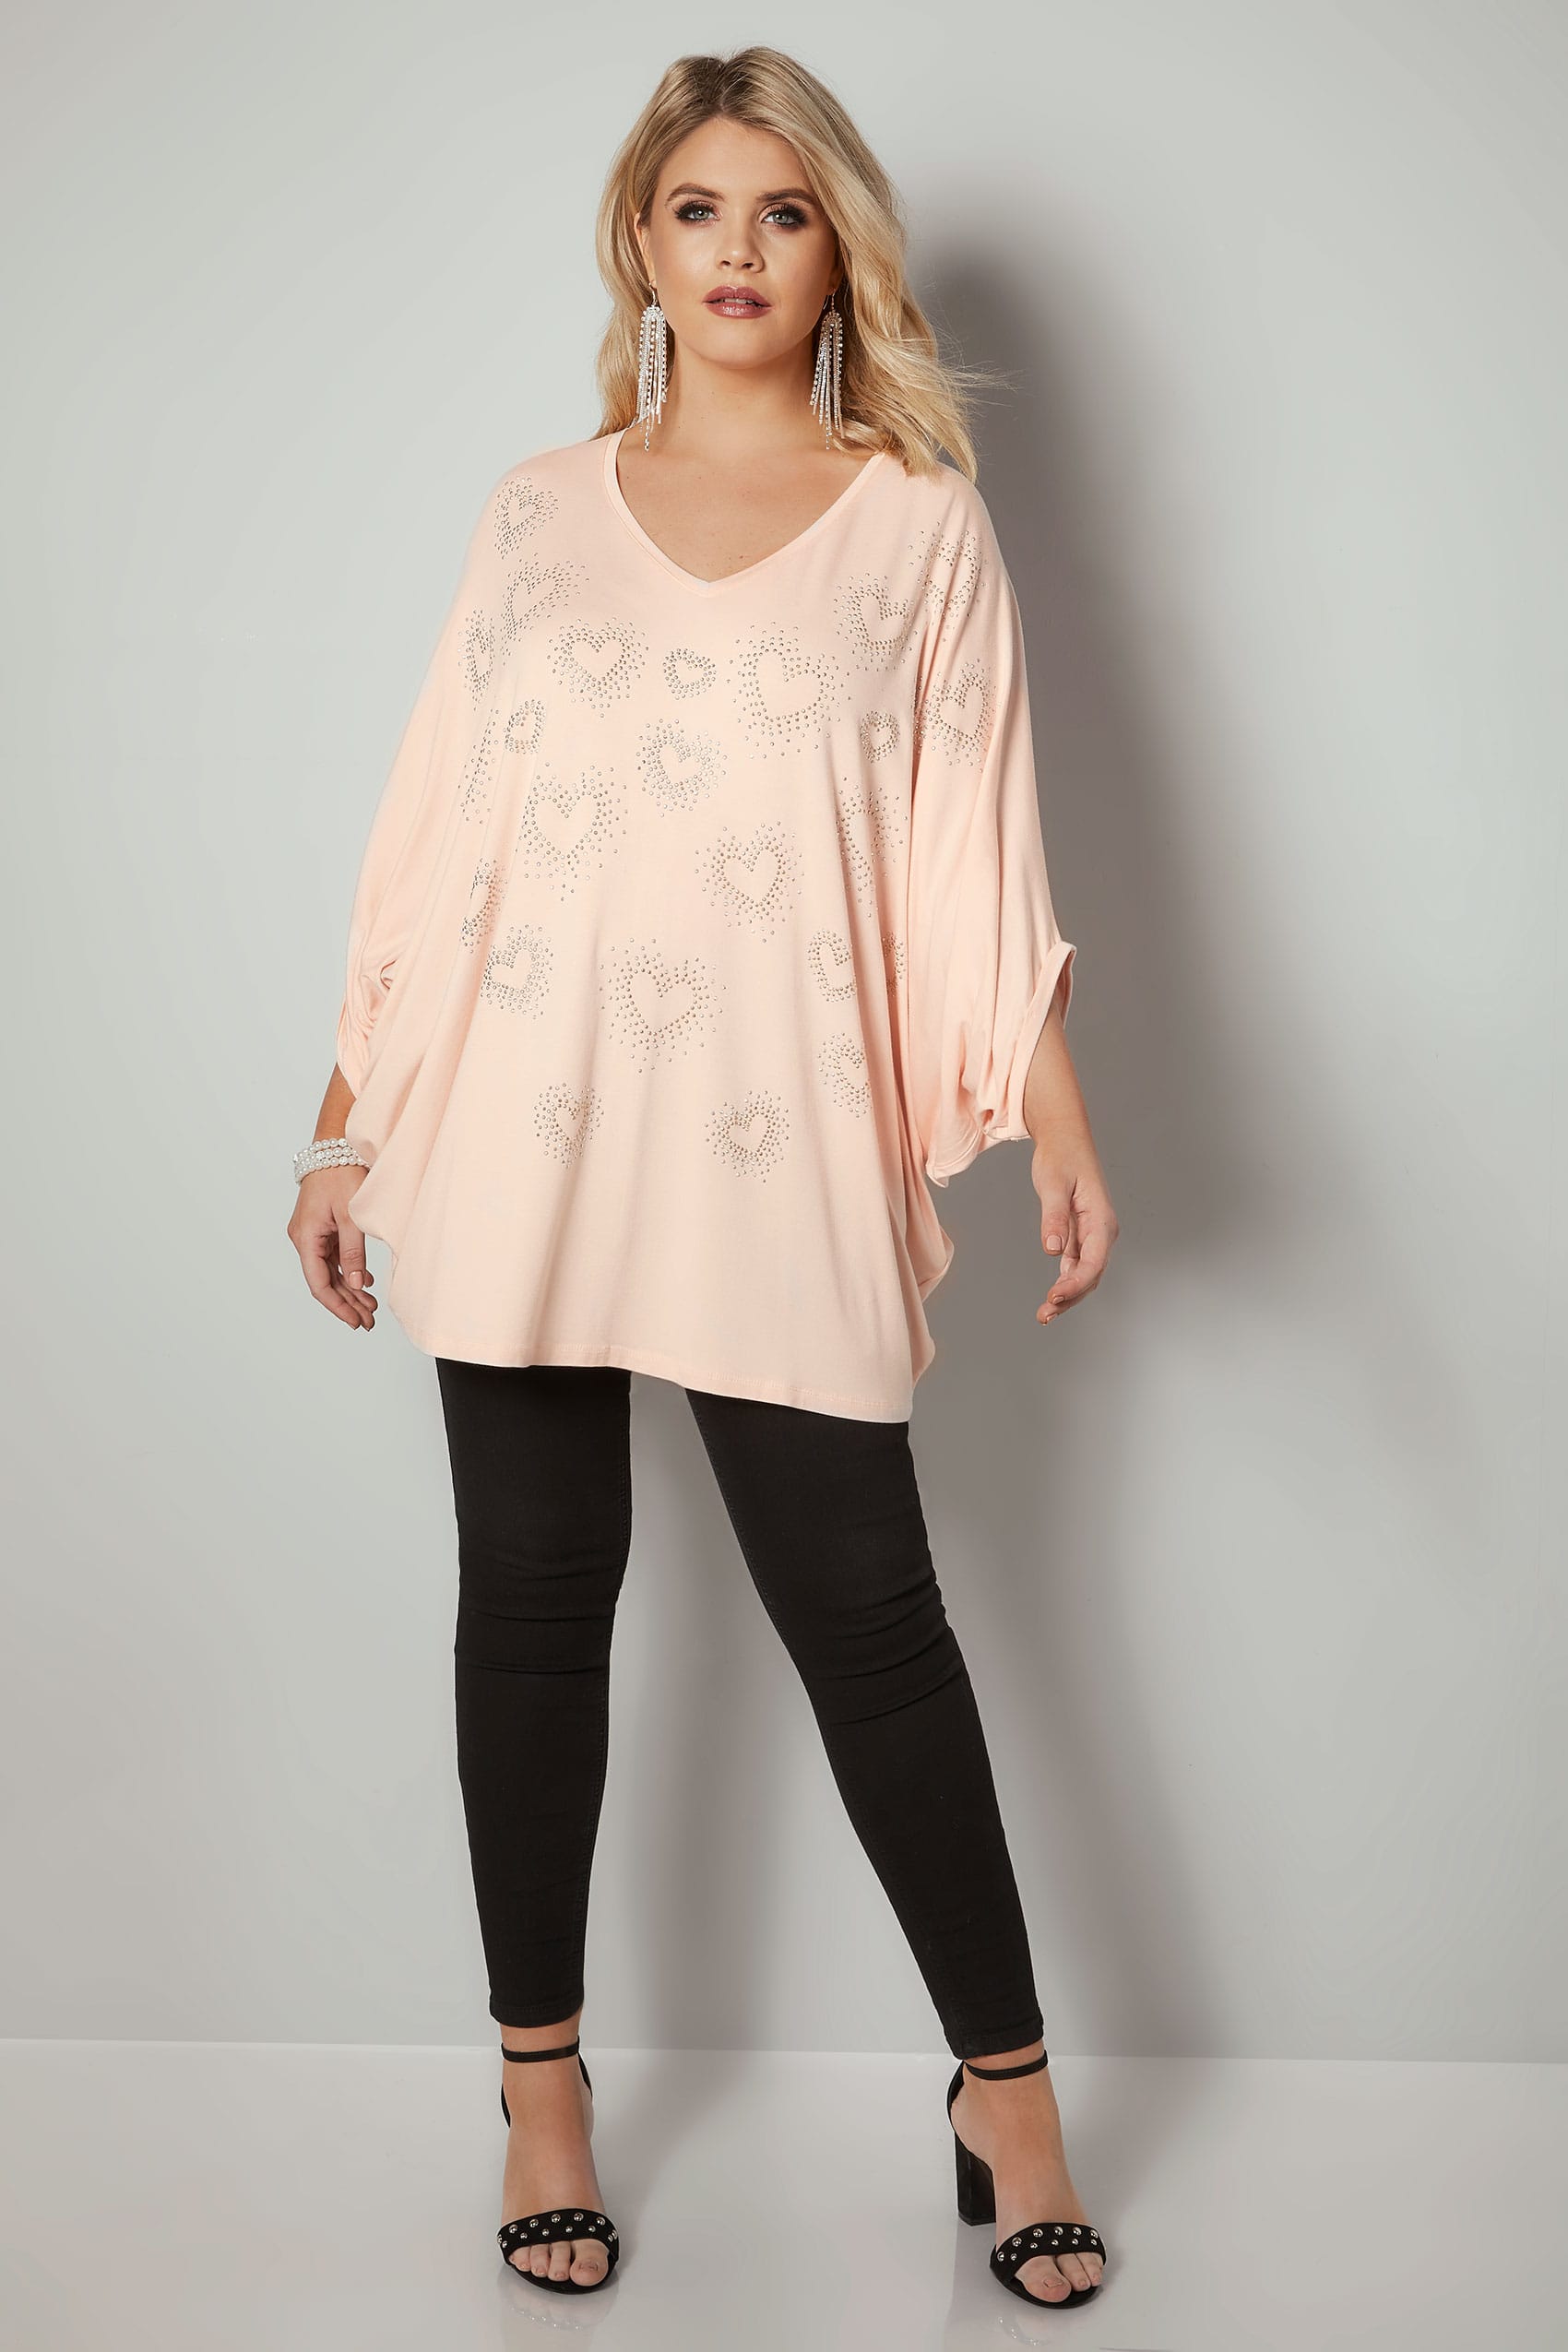 Blush Pink Heart Studded Cape Top, Plus size 16 to 36